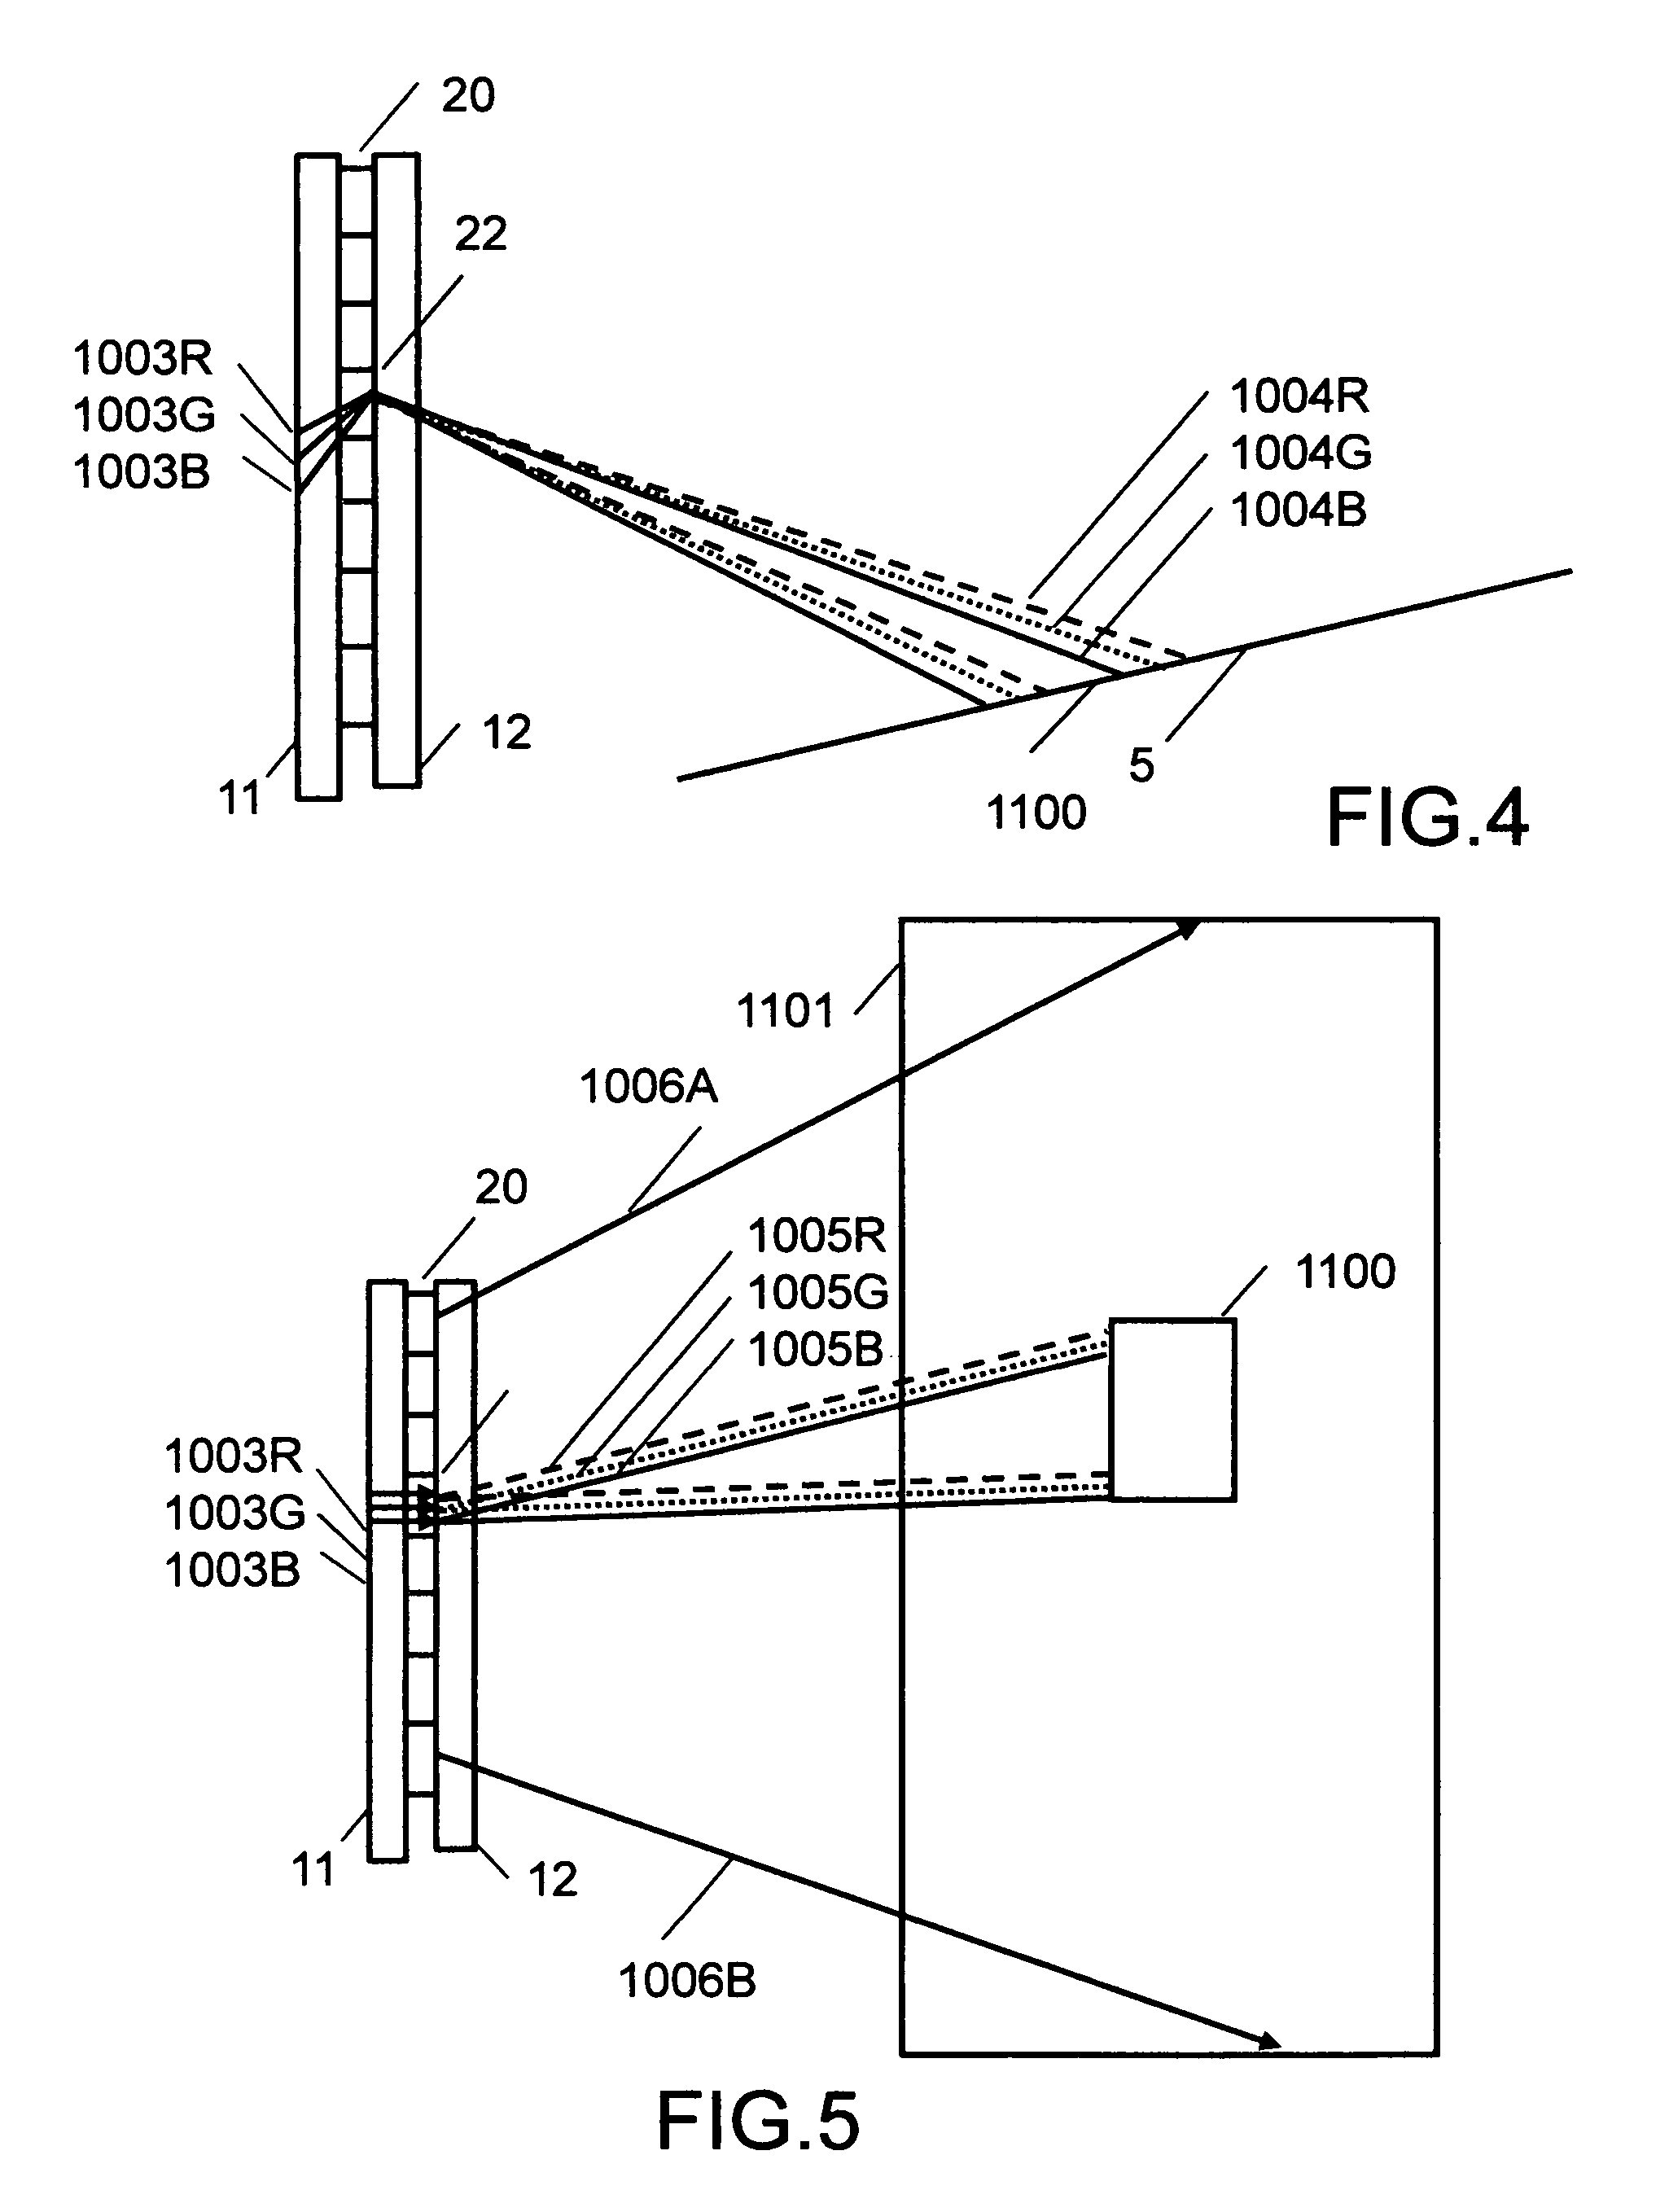 Diffractive waveguide providing structured illumination for object detection